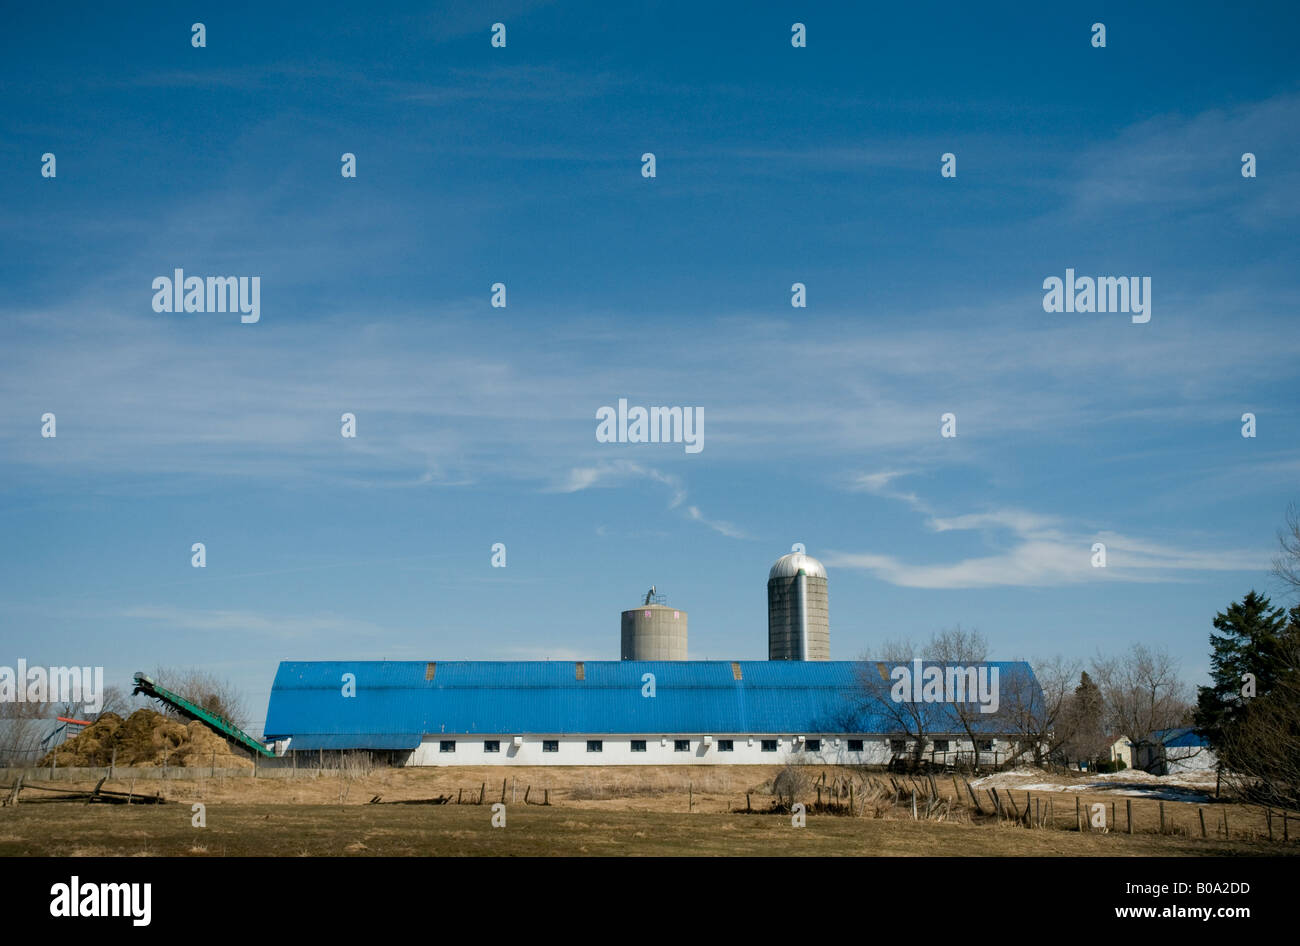 Barn and silos outside St Christine, Quebec, Canada. Stock Photo